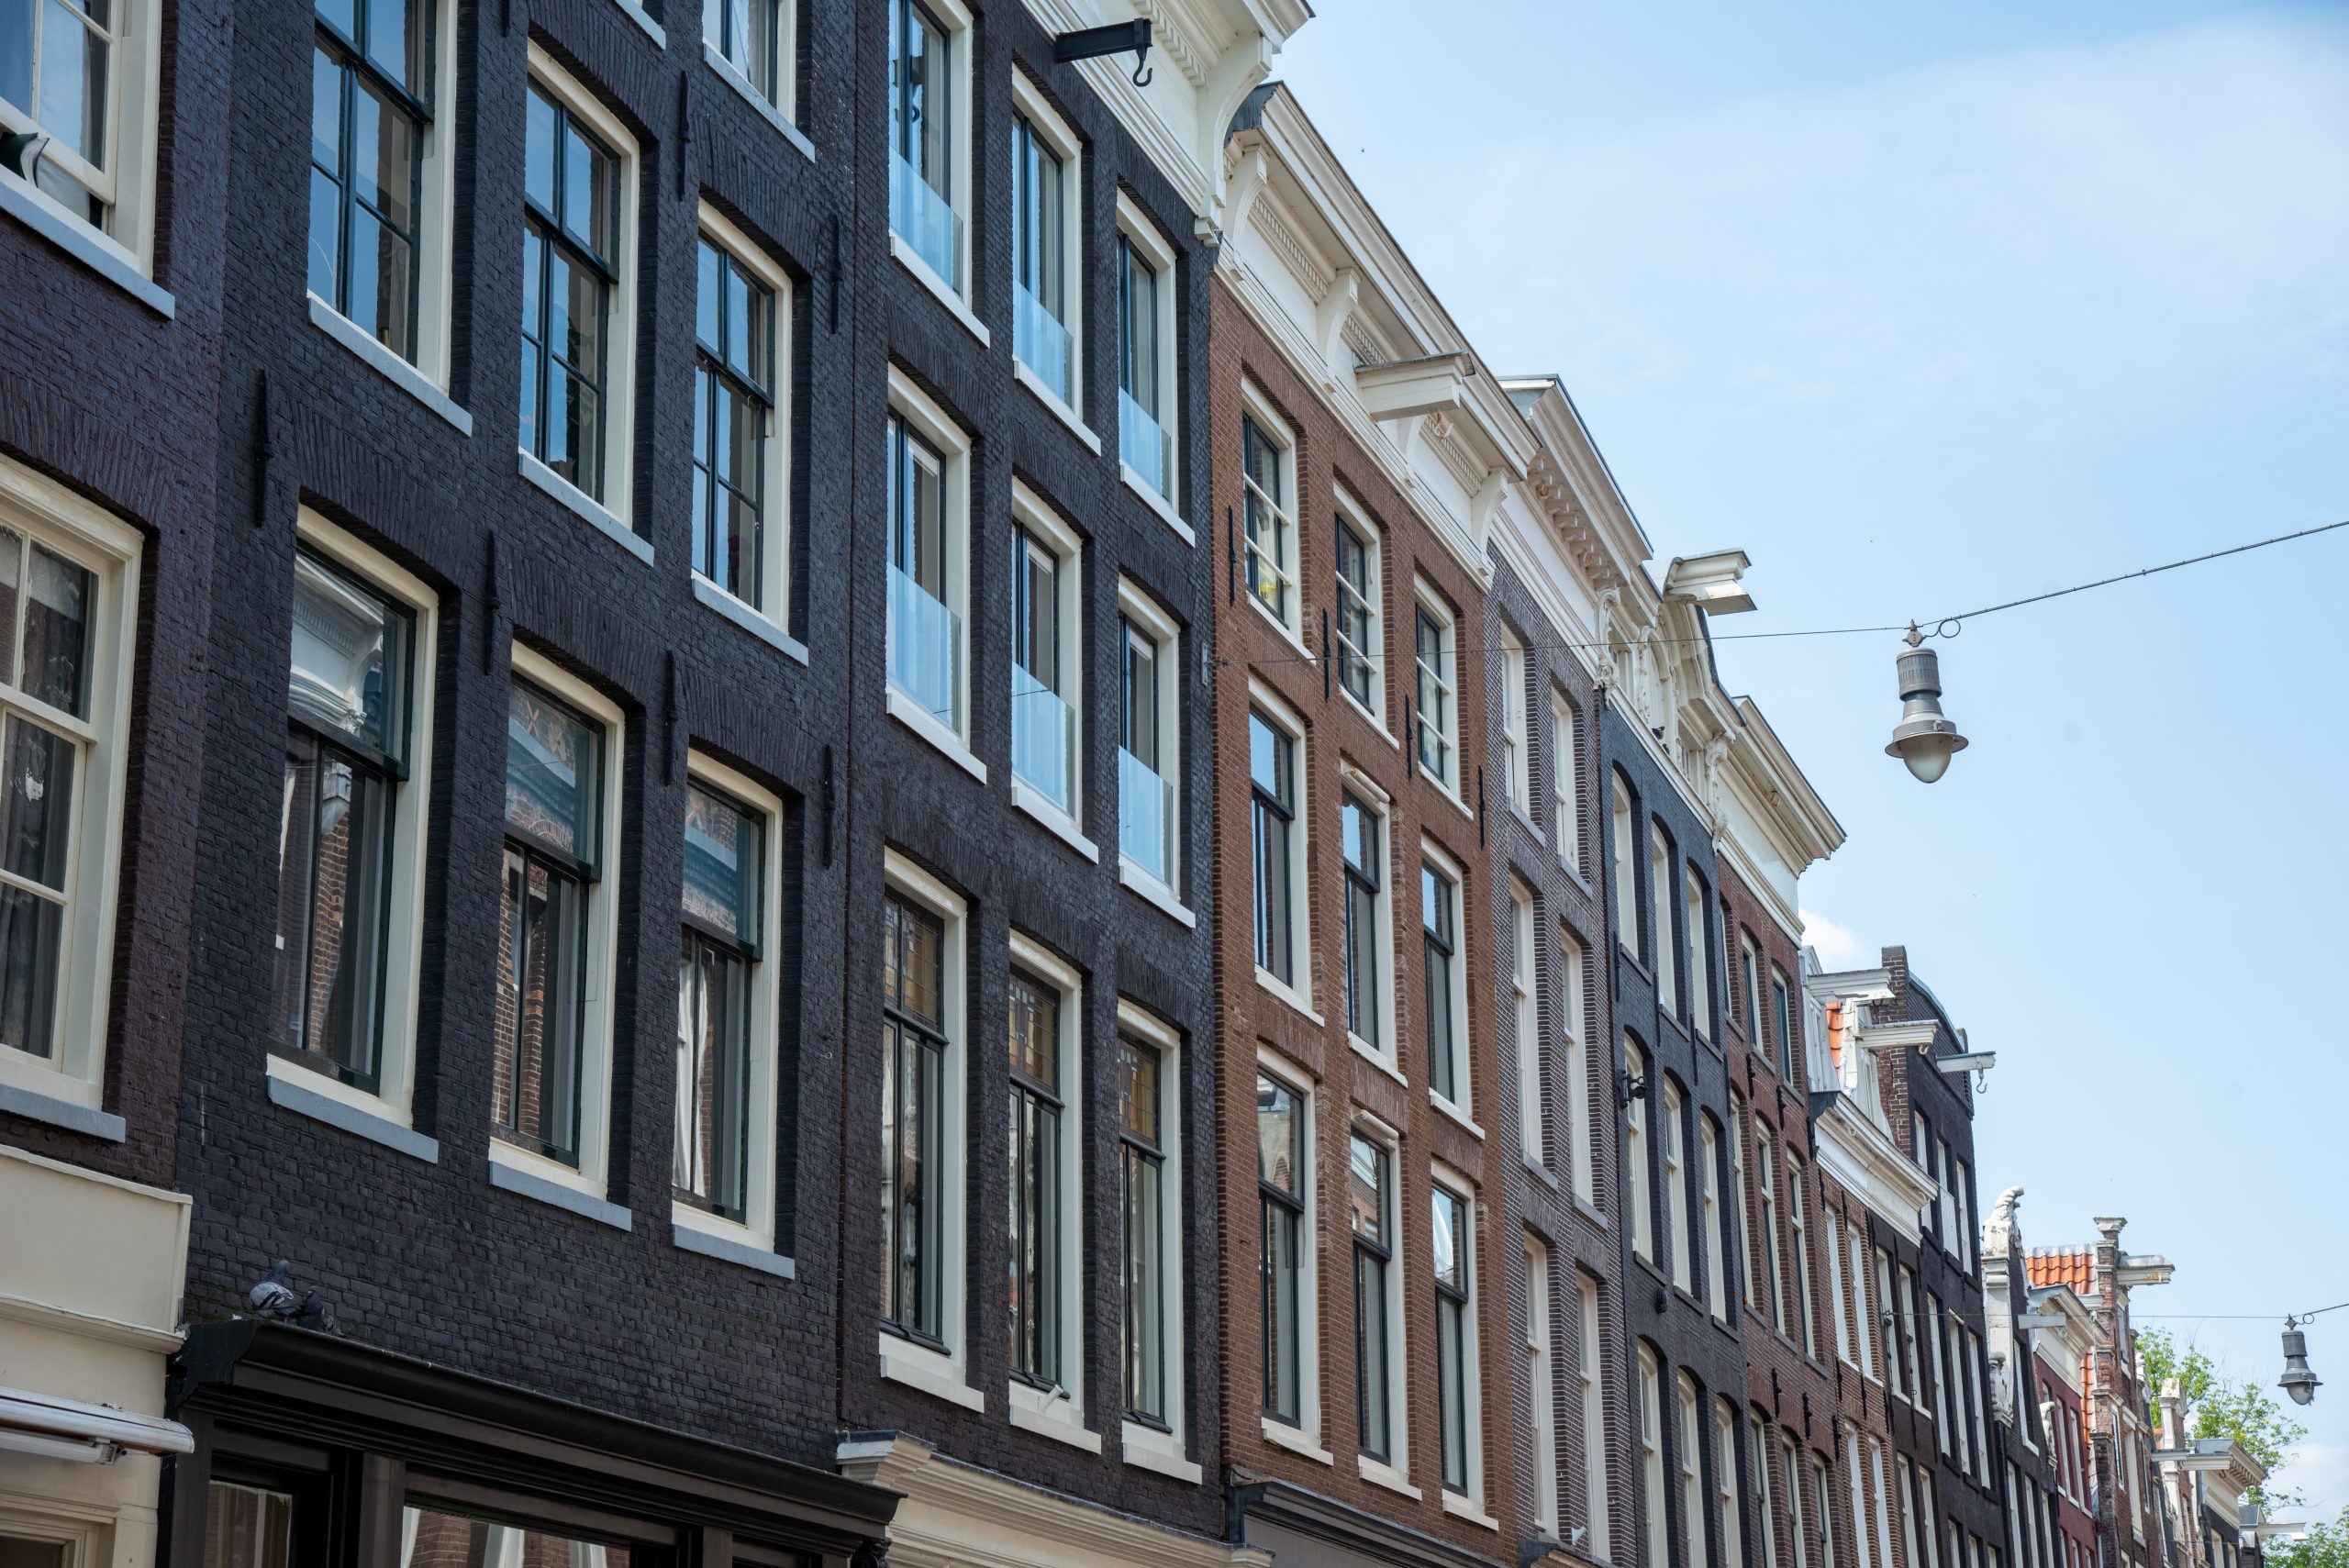 Traditional,Canal,Houses,On,Amsterdam